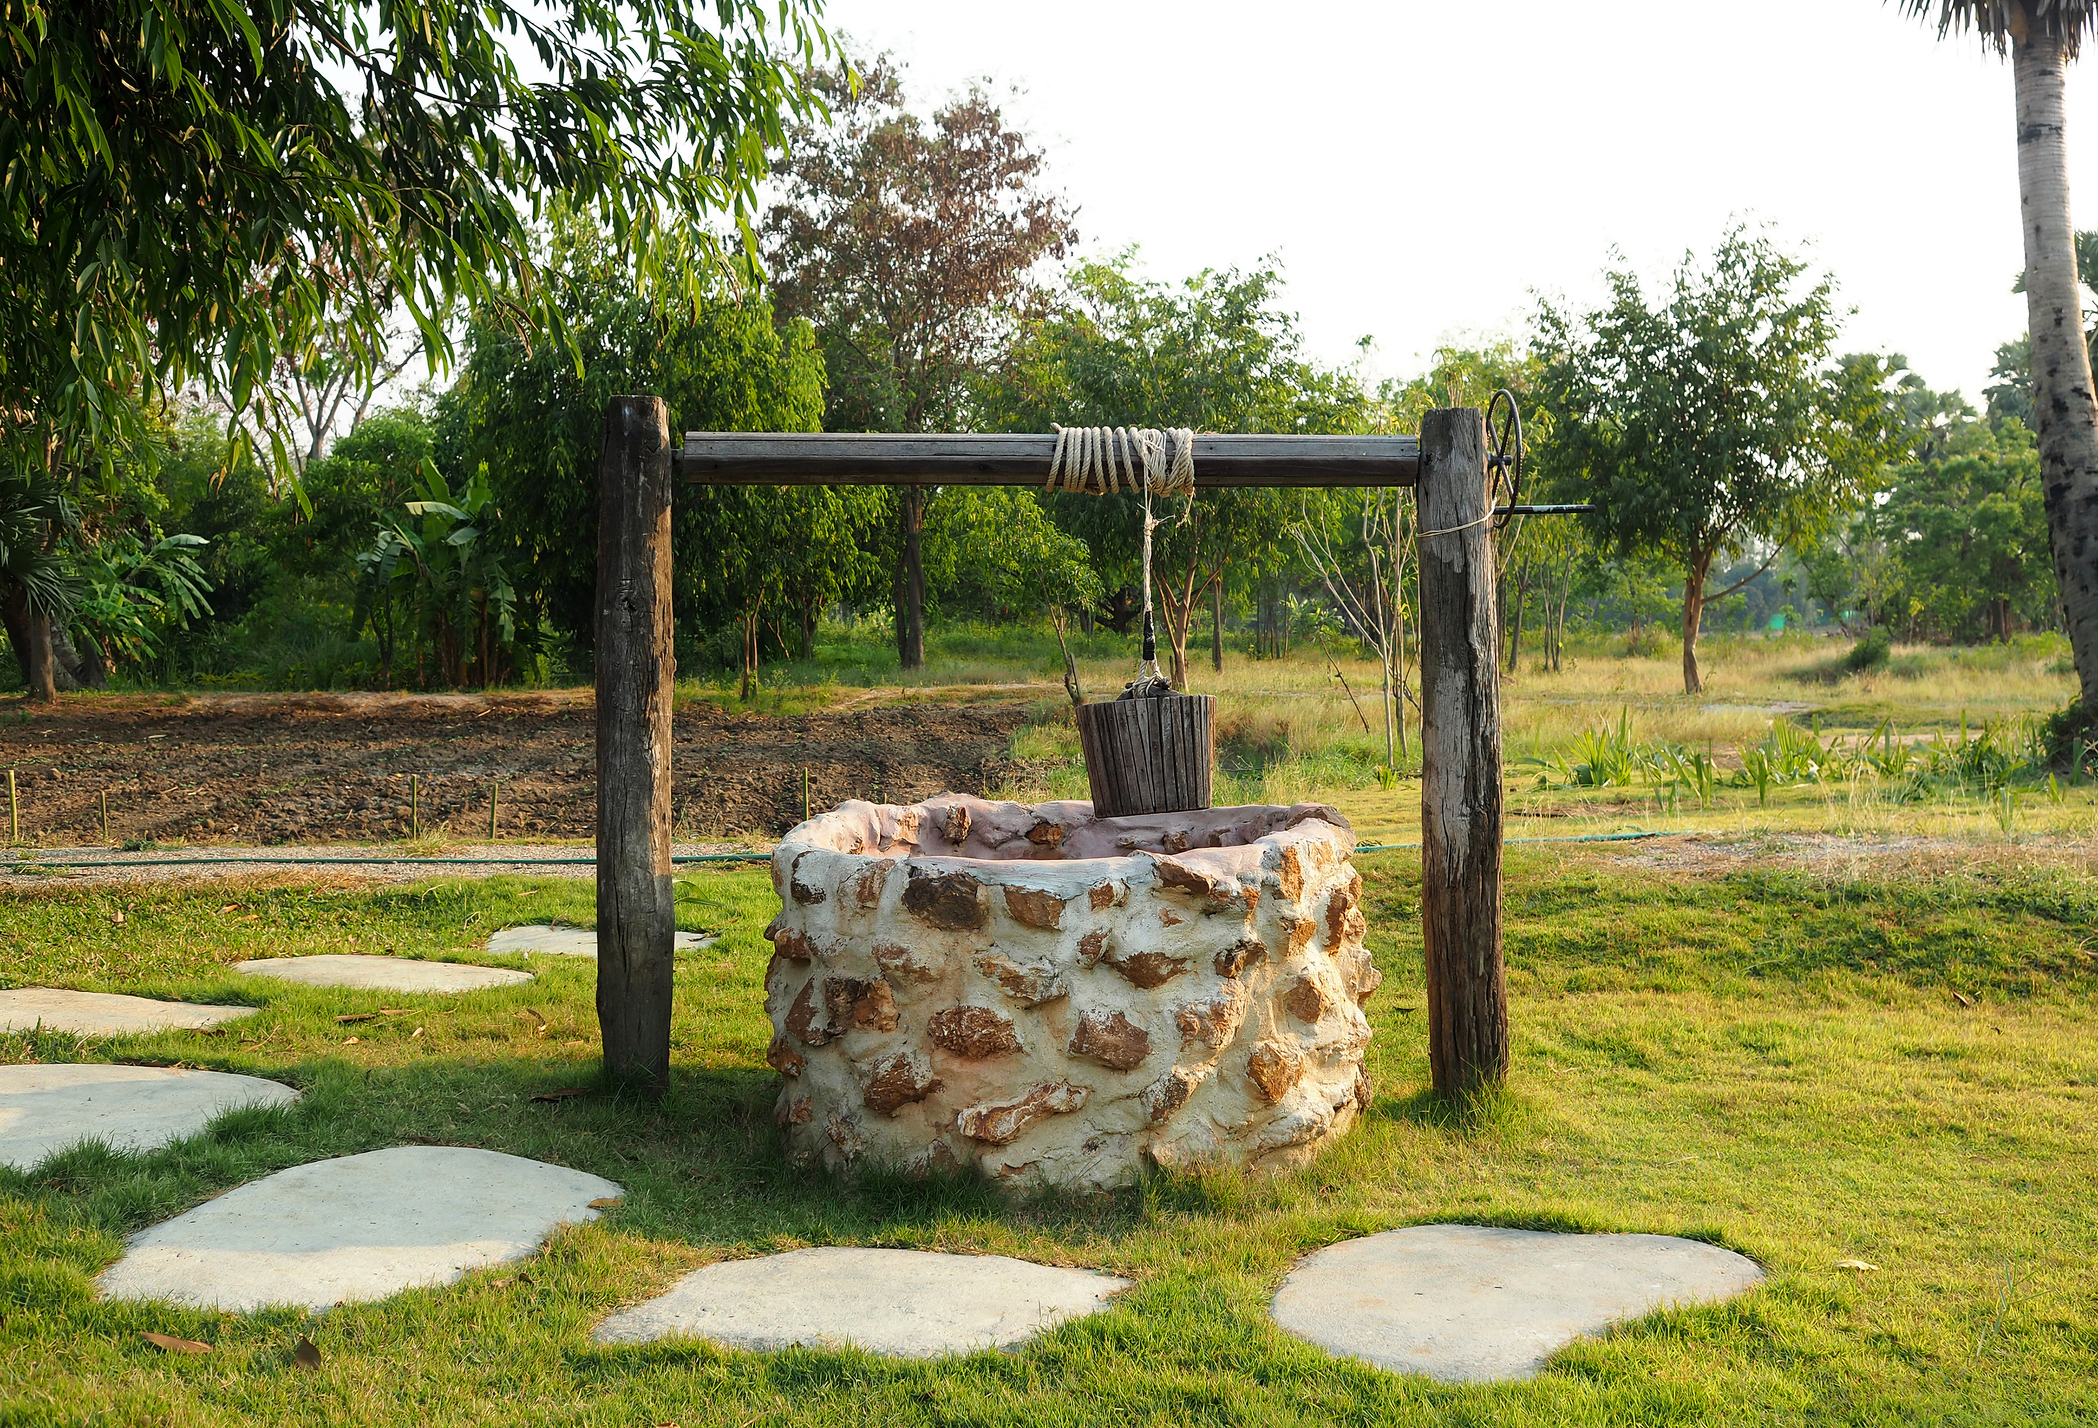 Image of a well on a farm